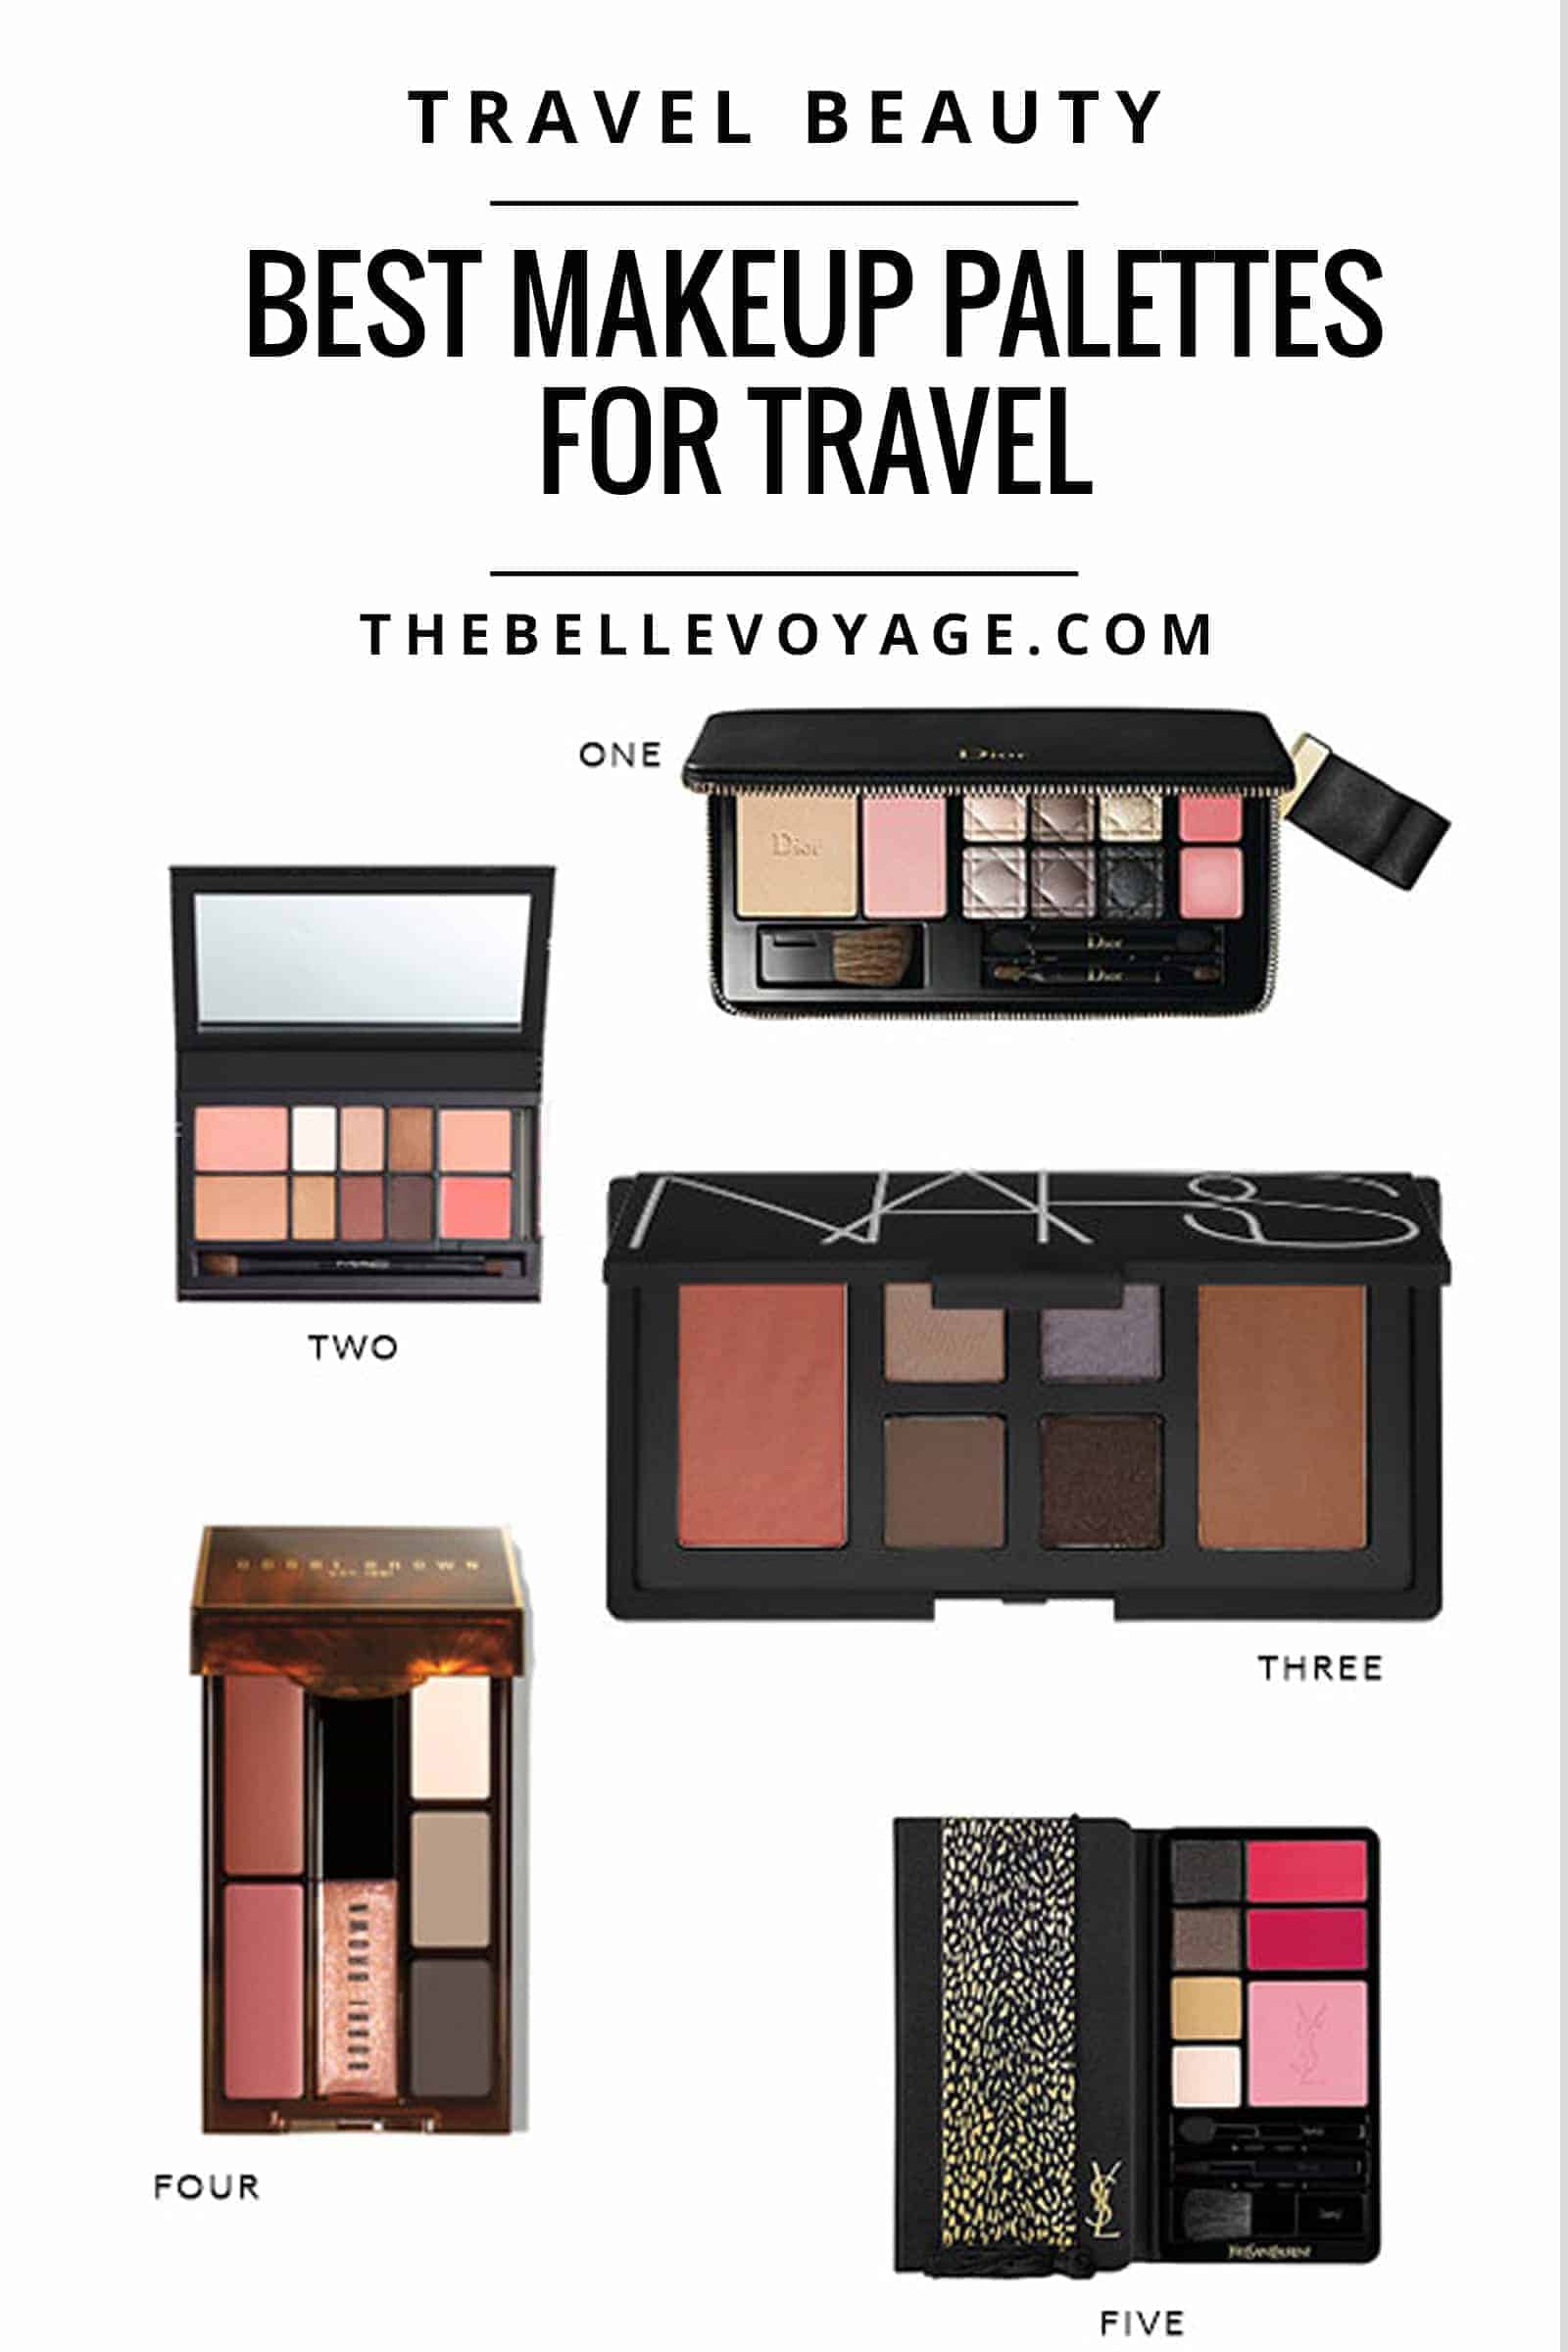 The Best Makeup Palettes for Travel The Belle Voyage